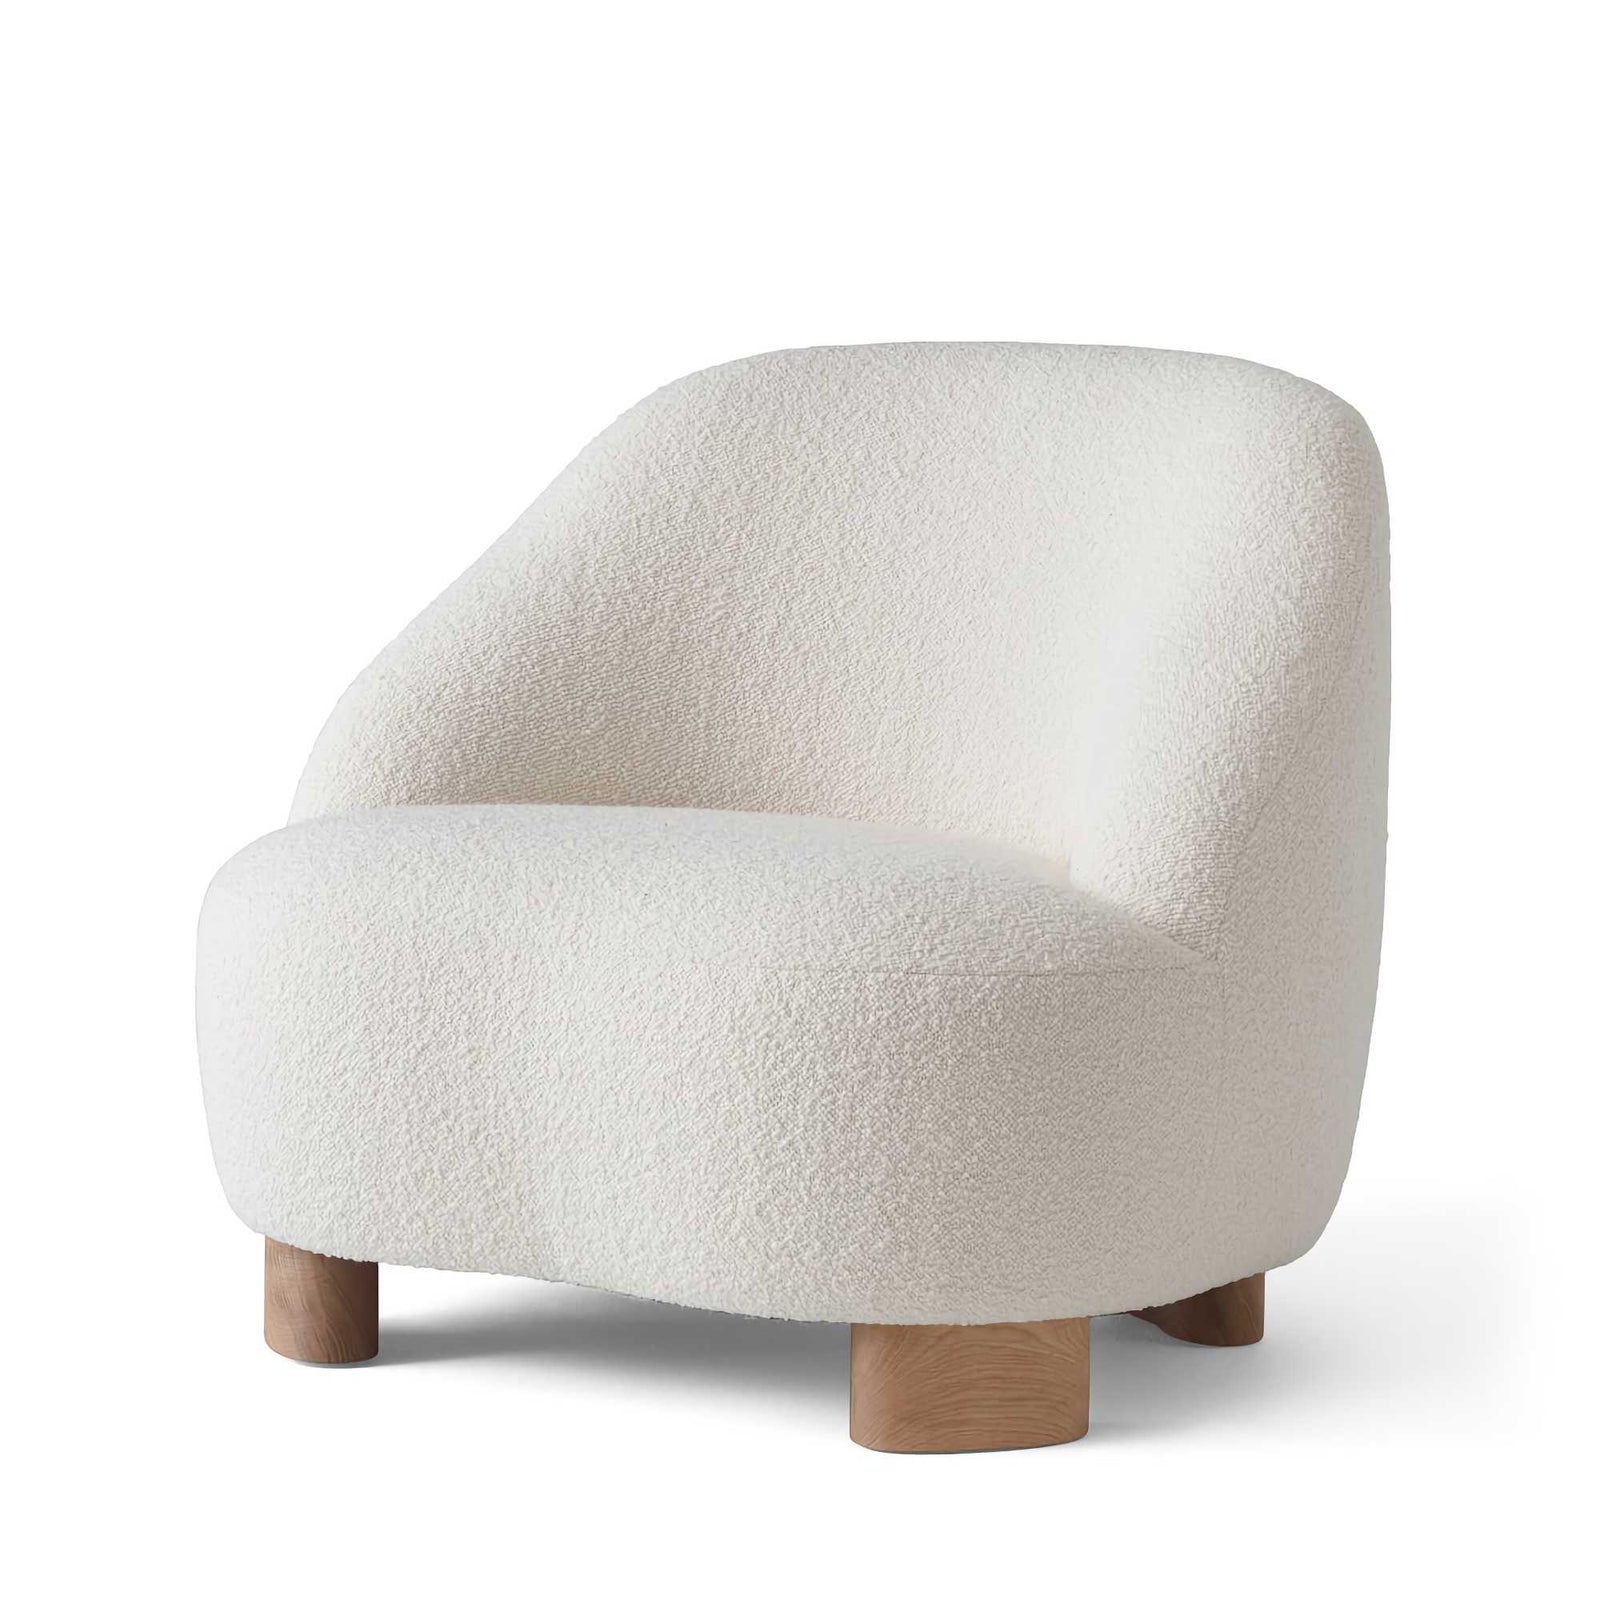 &Tradition ATD2 Wulff Lounge Chair and ATD3 Pouf, sheepskin 